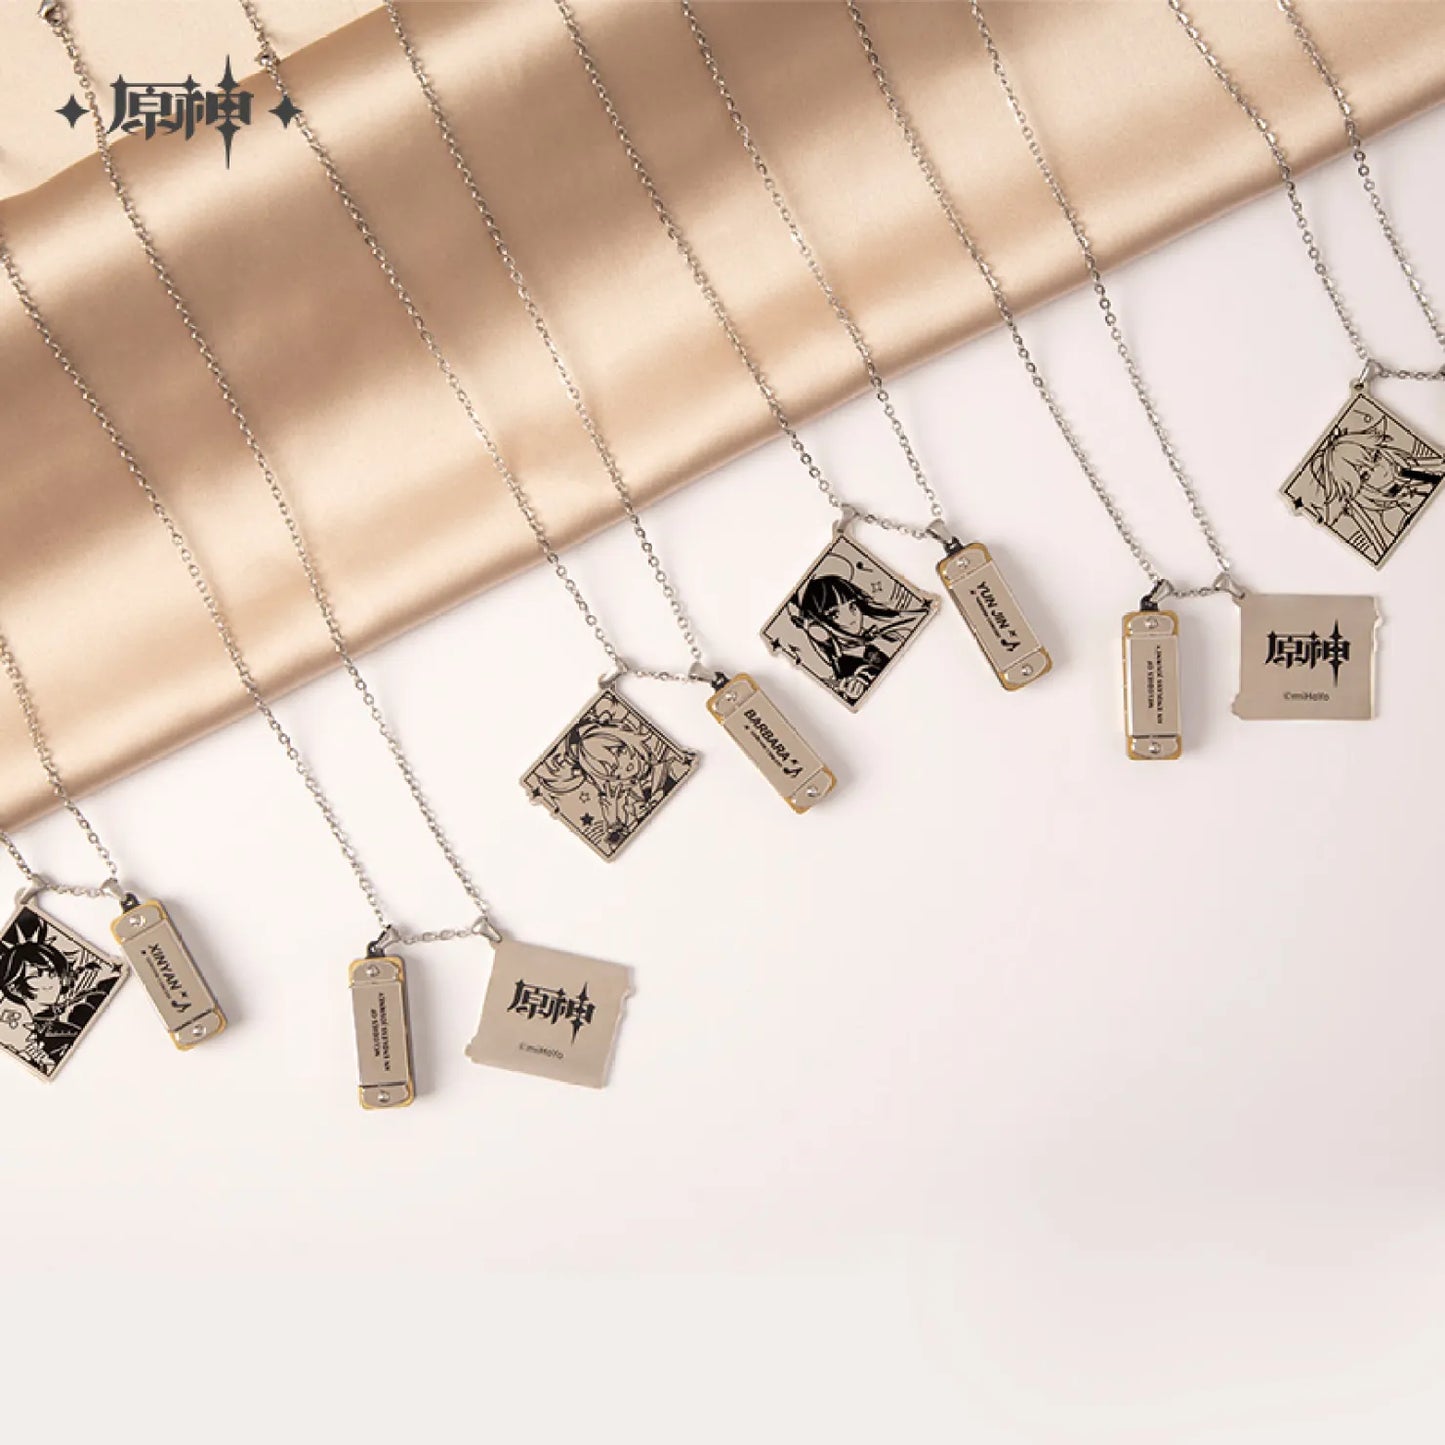 [OFFICIAL MERCHANDISE] Genshin Concert 2022 Melodies of an Endless Journey: Mini Harmonica Necklace